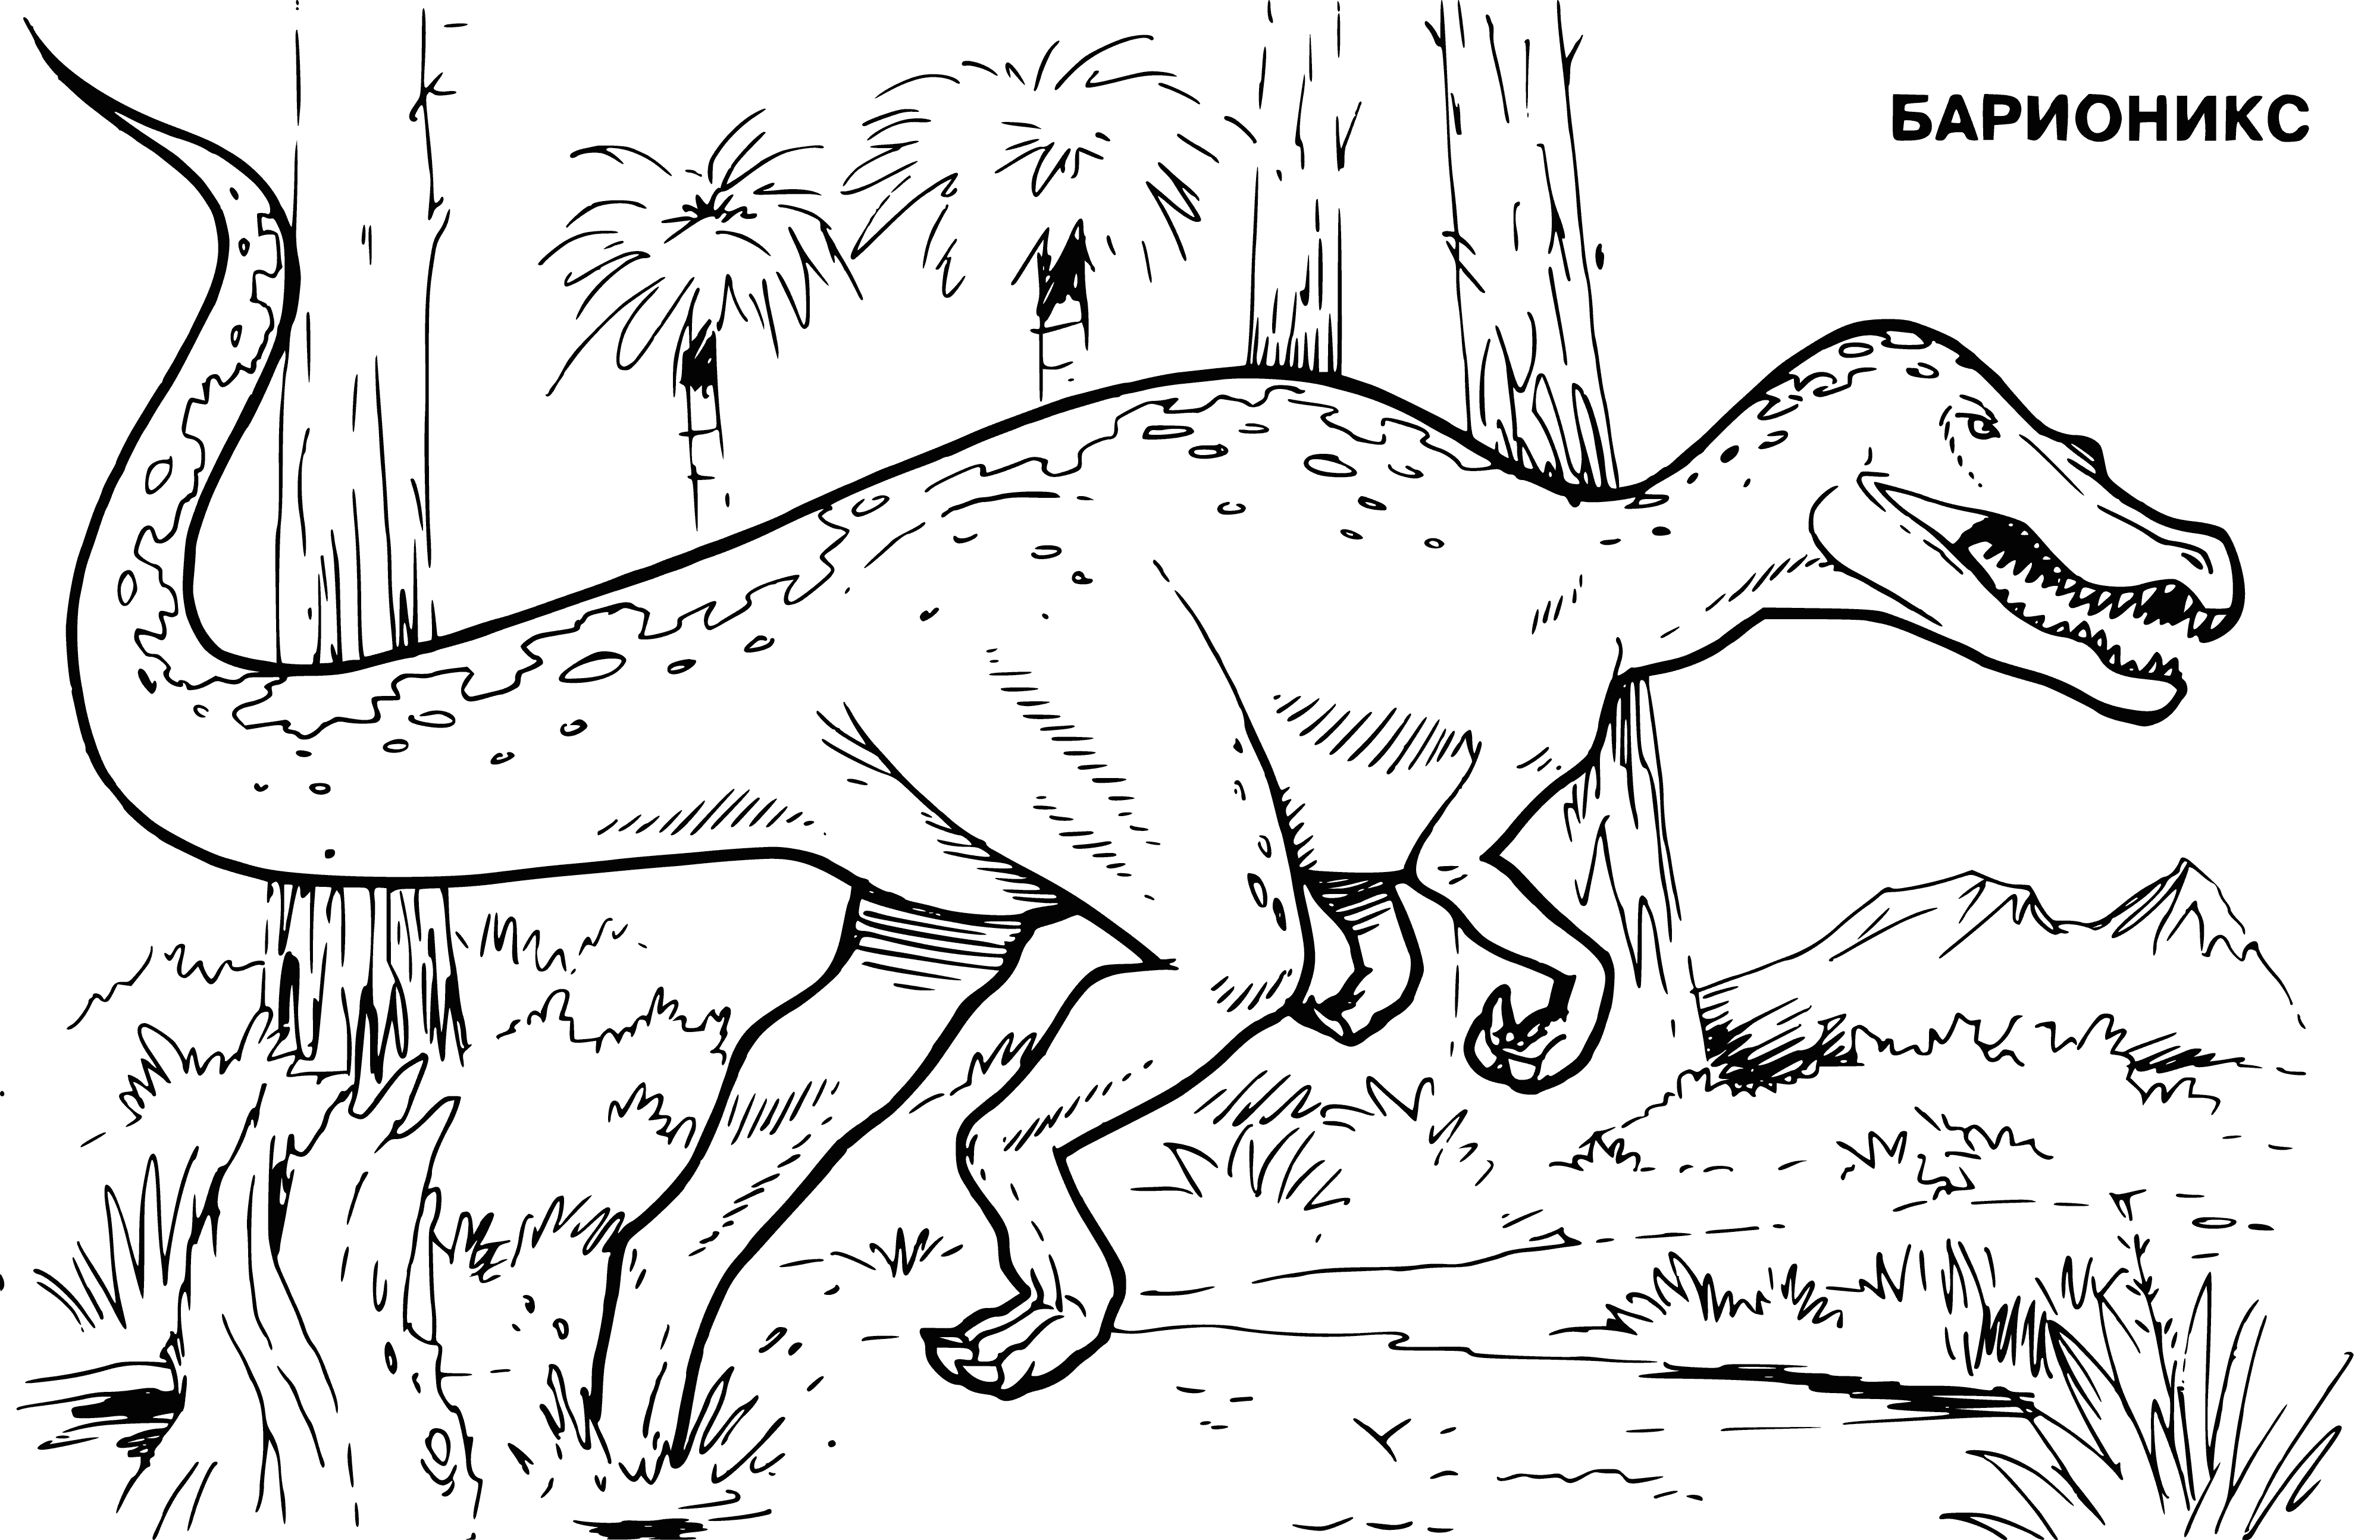 coloring page: Large, four-legged dino with big head, beaked mouth, greenish-brown skin, 3 toes/foot & long, thin tail. Belly lighter in color.